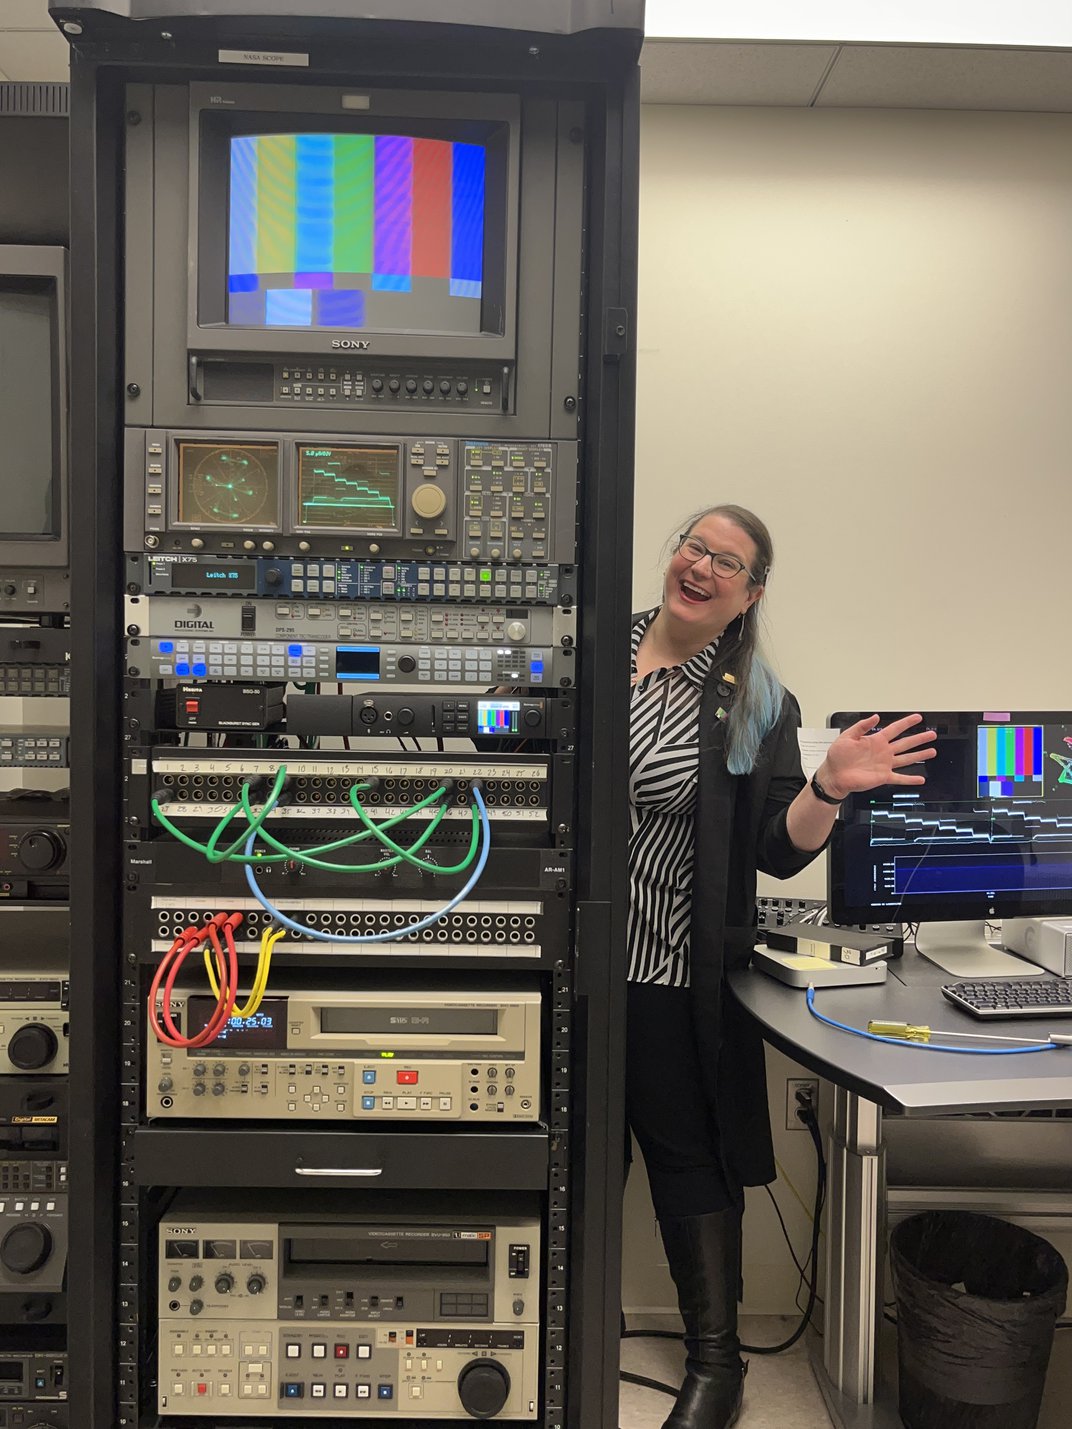 NMAAHC Video Archives Technician, Emily Nabasny smiles and waves to the camera from behind a towering rack of analog video equipment including a TV monitor displaying color bars.